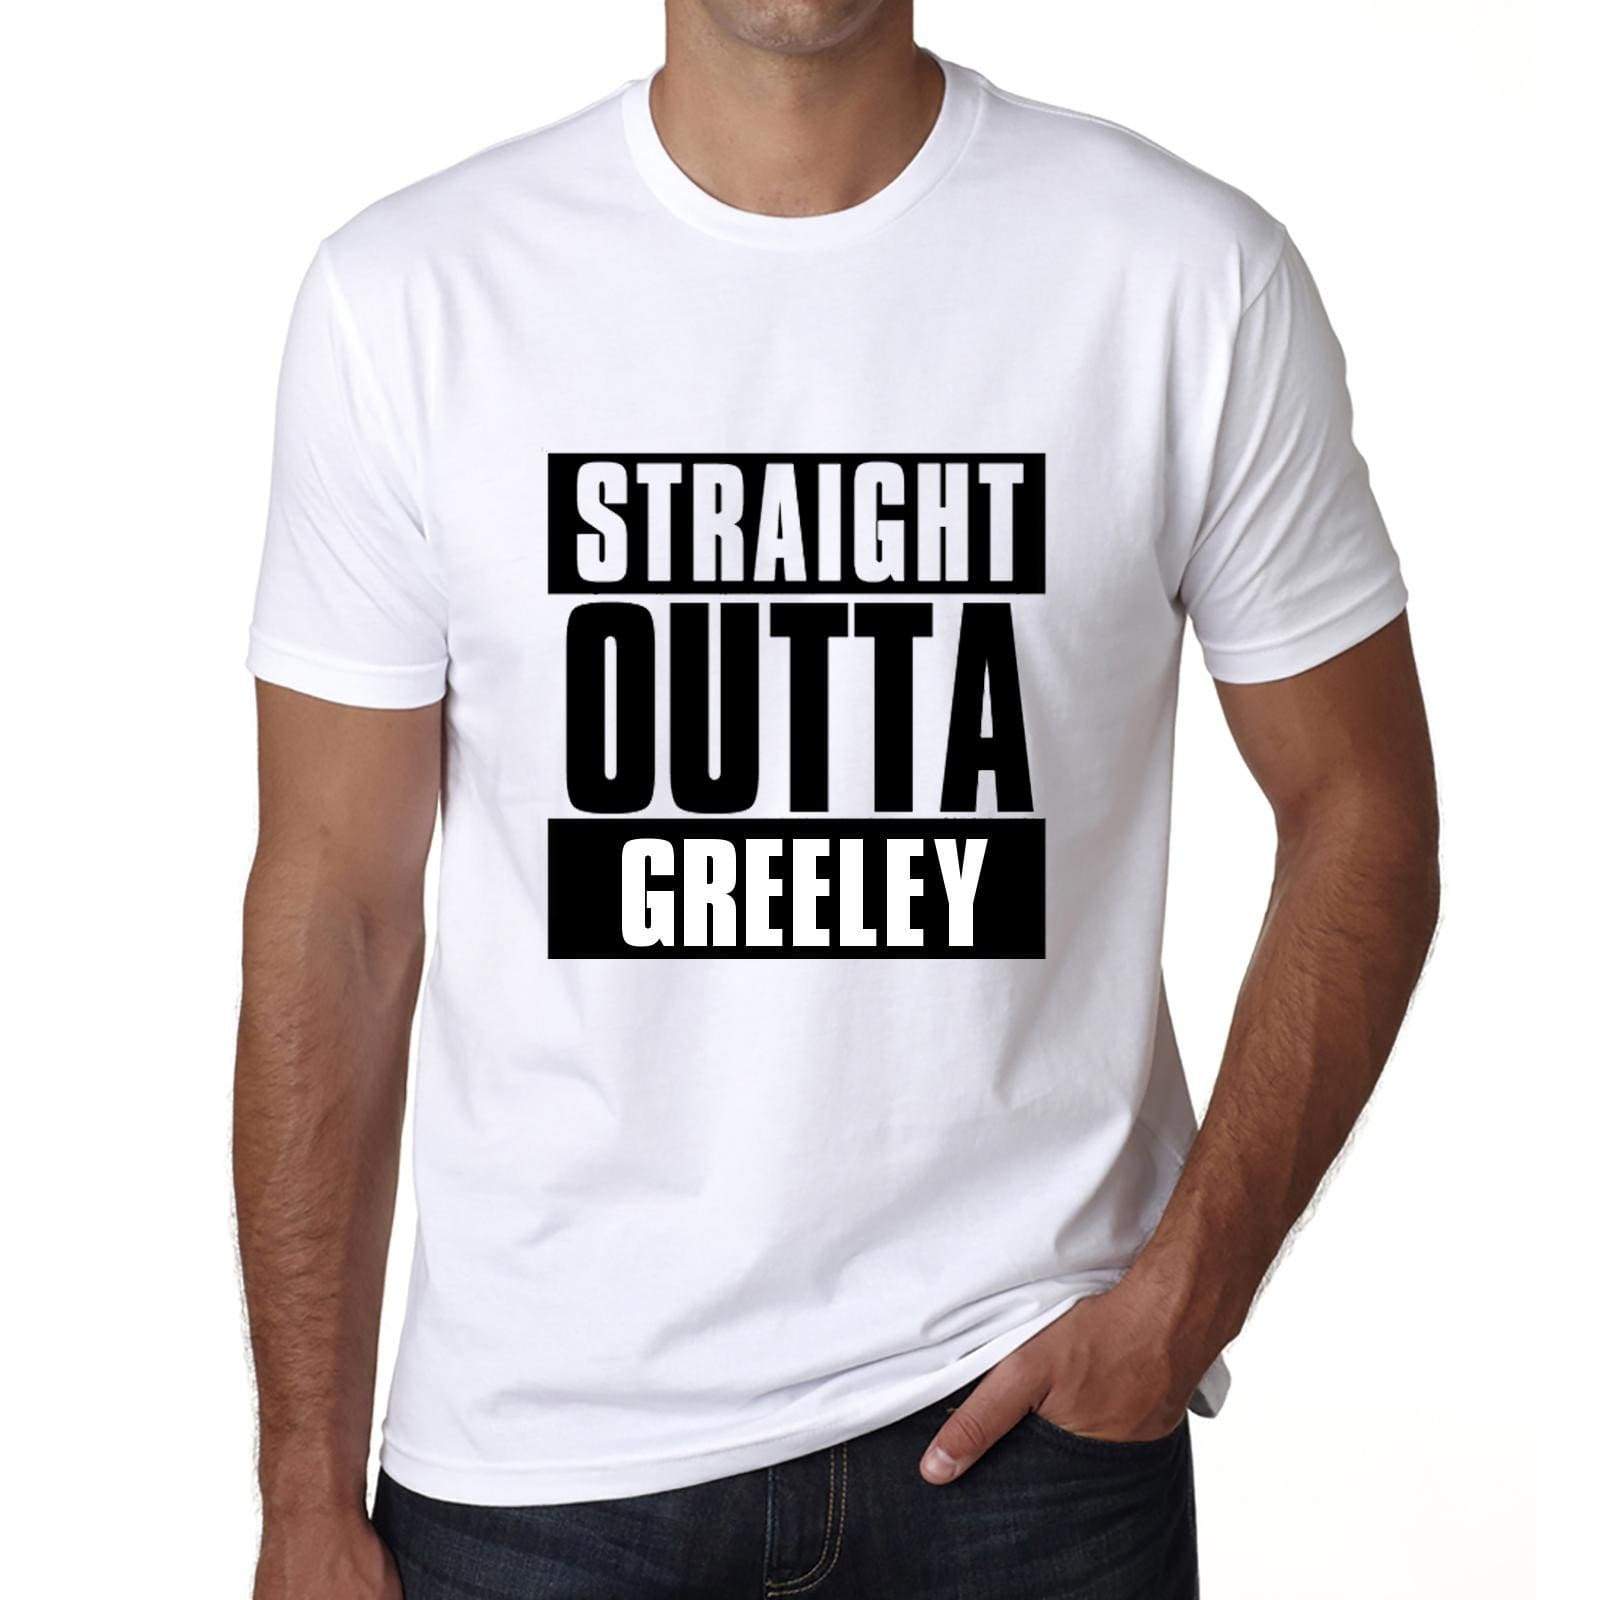 Straight Outta Greeley Mens Short Sleeve Round Neck T-Shirt 00027 - White / S - Casual